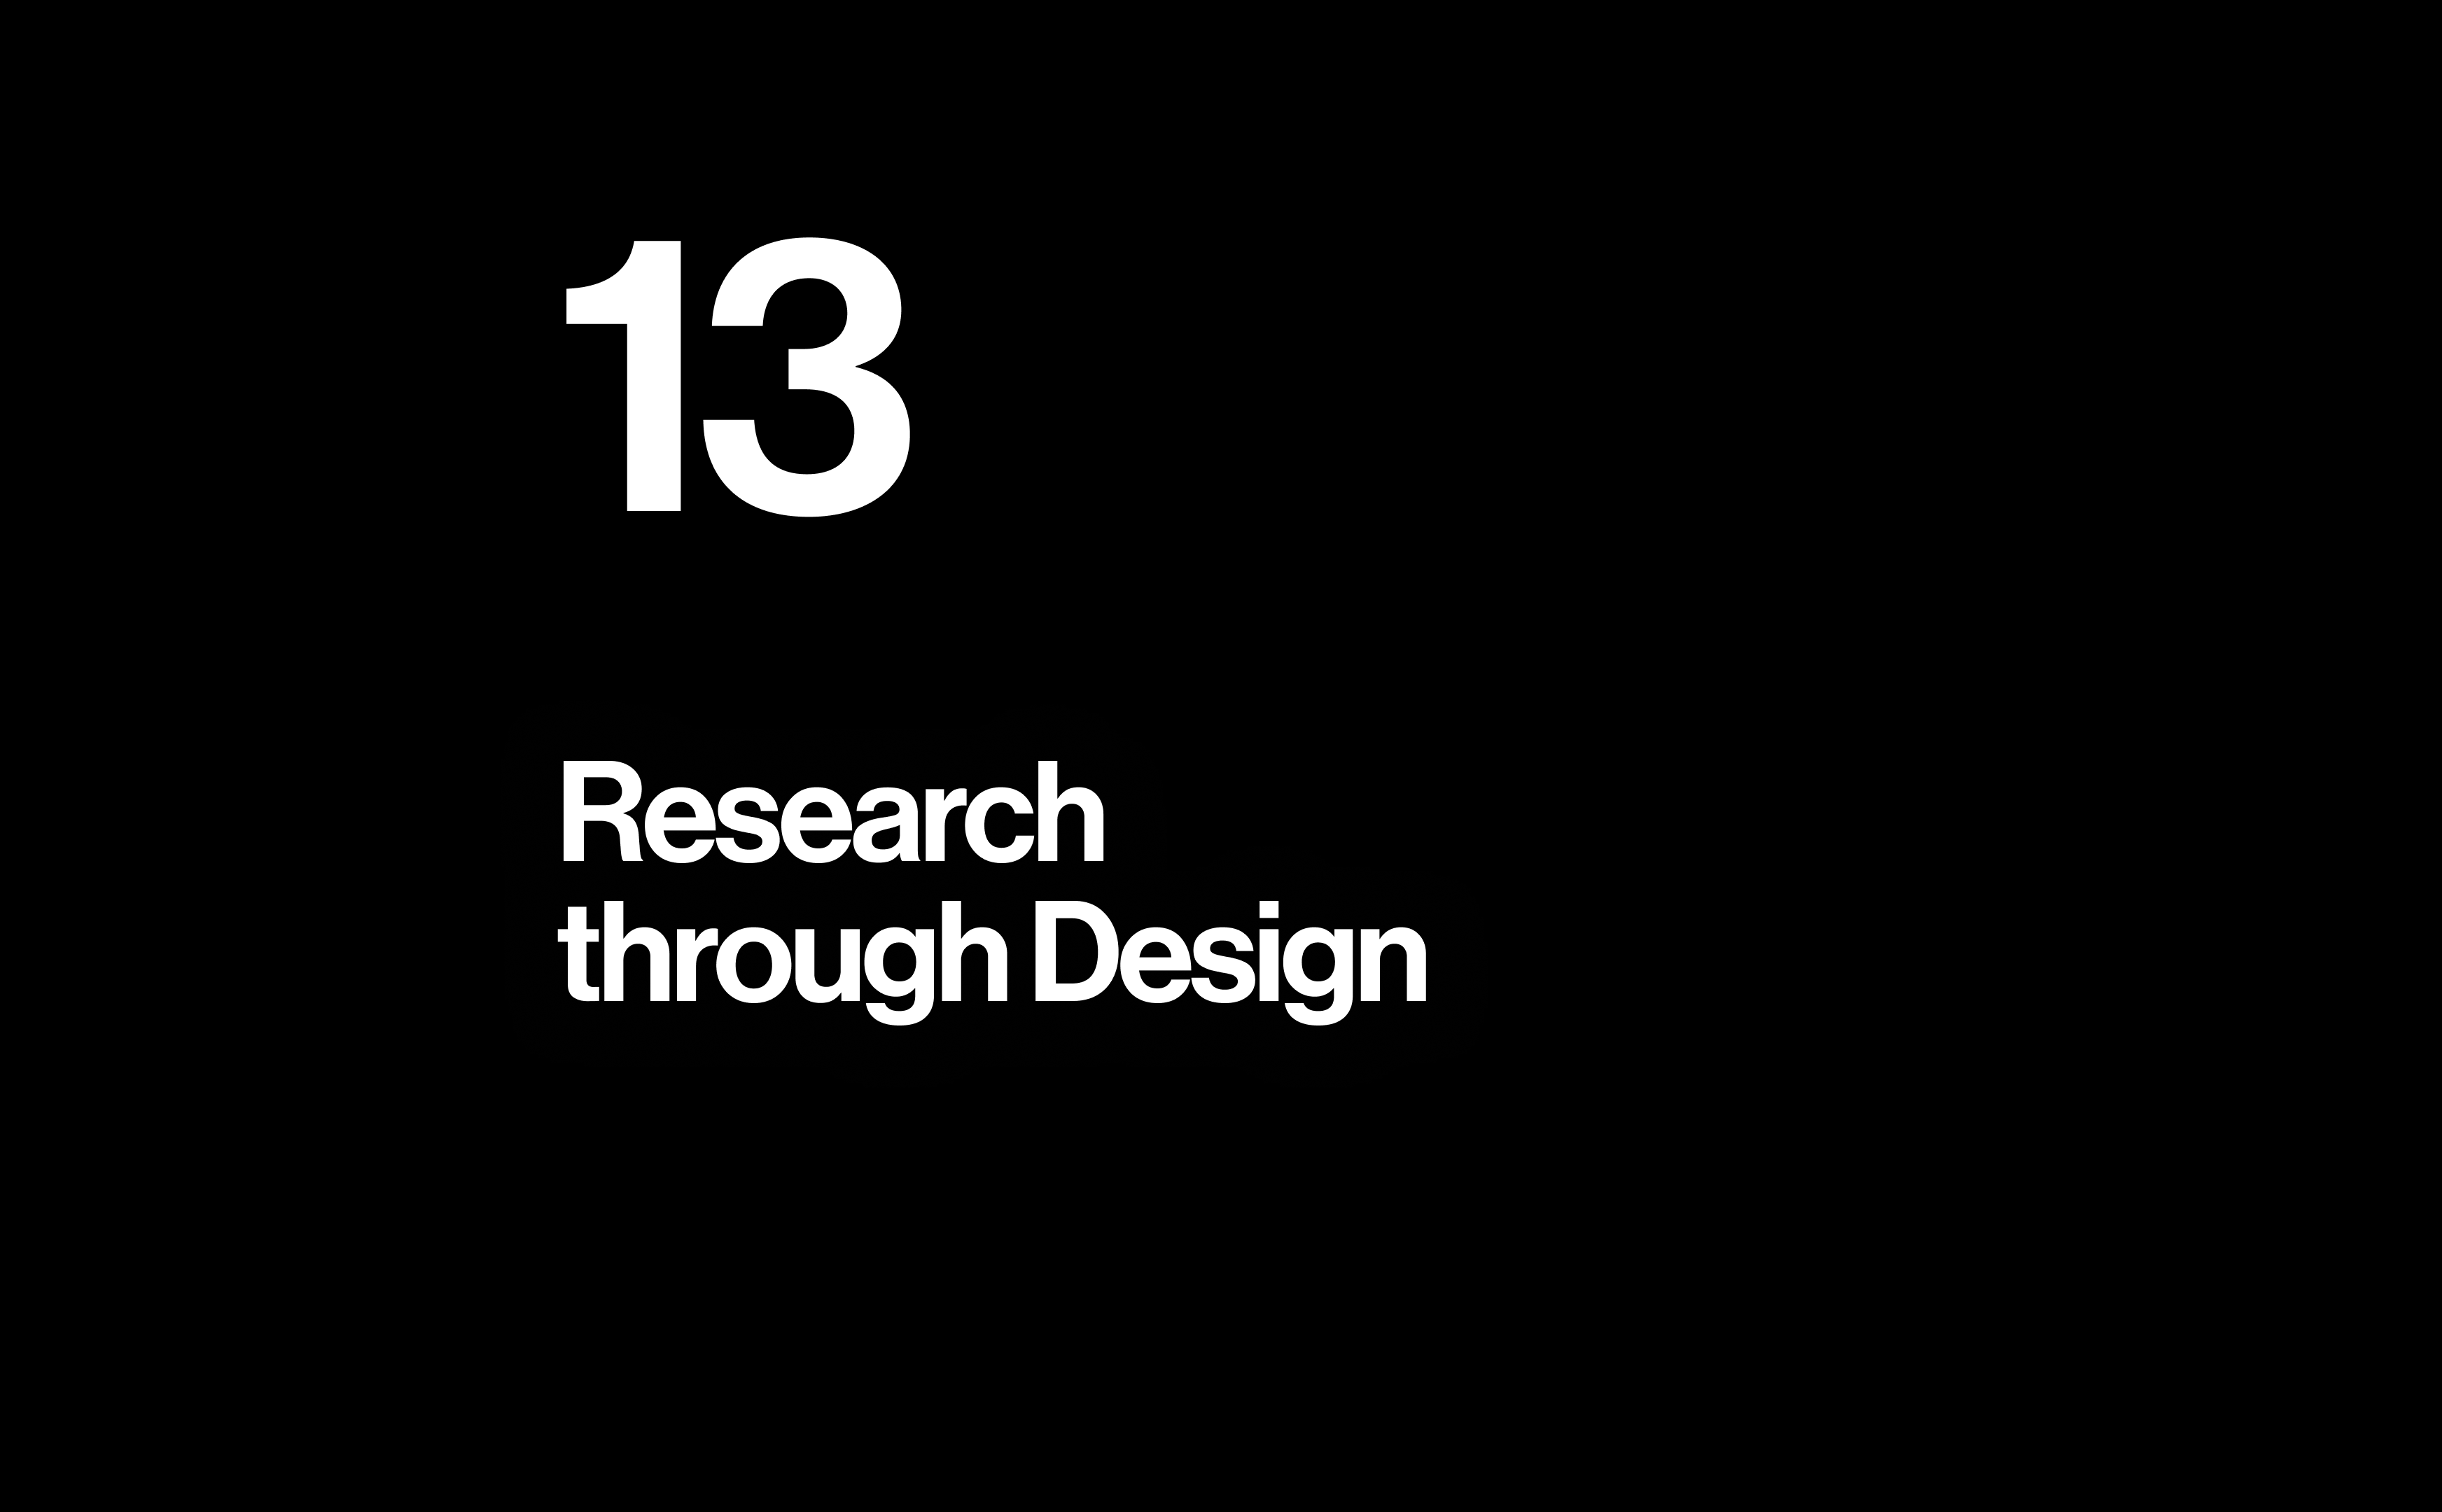 What is Research through Design?